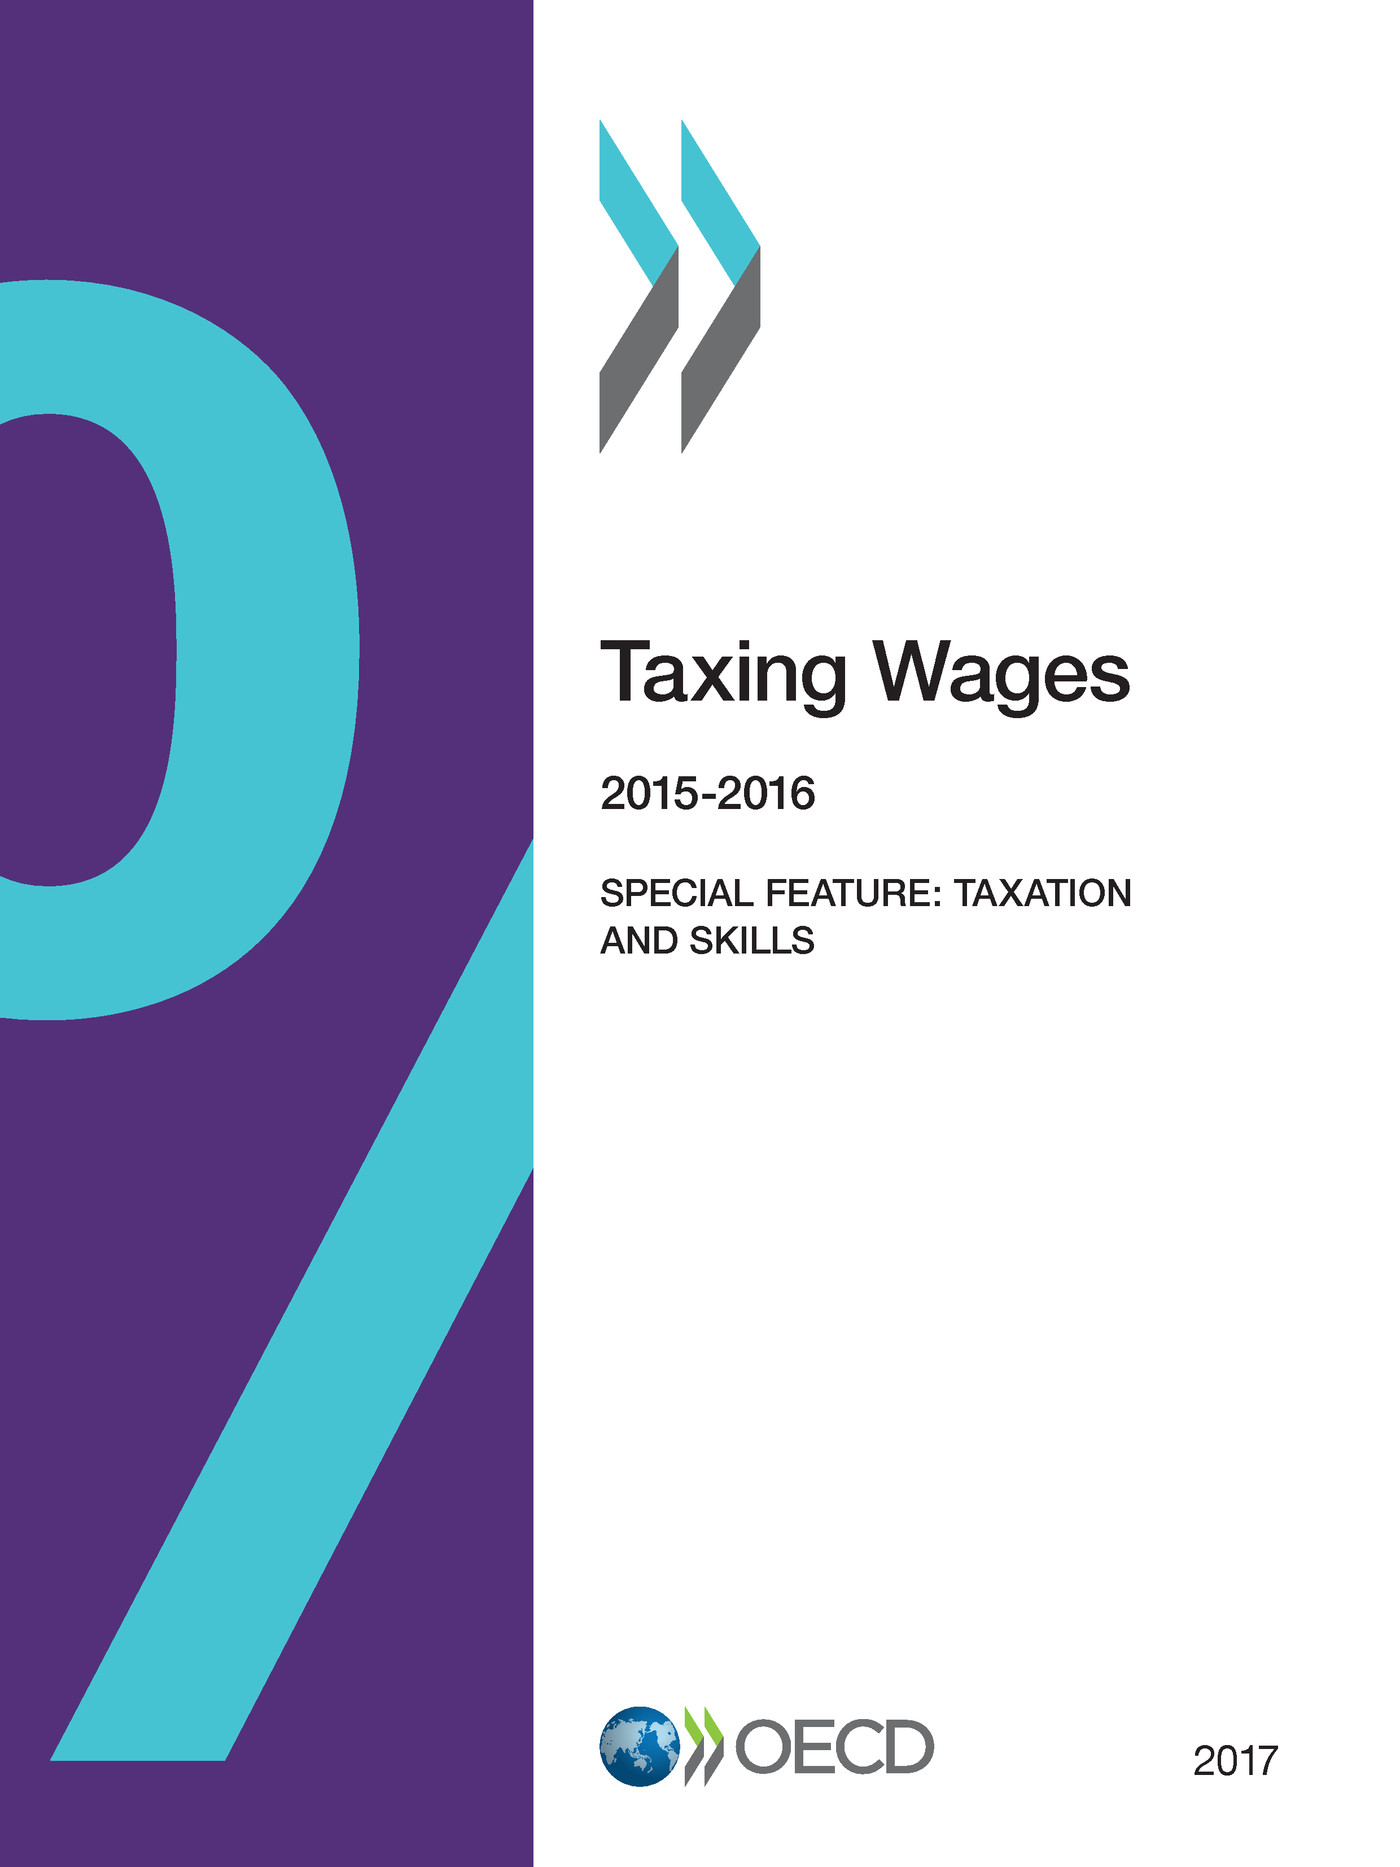 Taxing Wages 2017 -  Collectif - OCDE / OECD